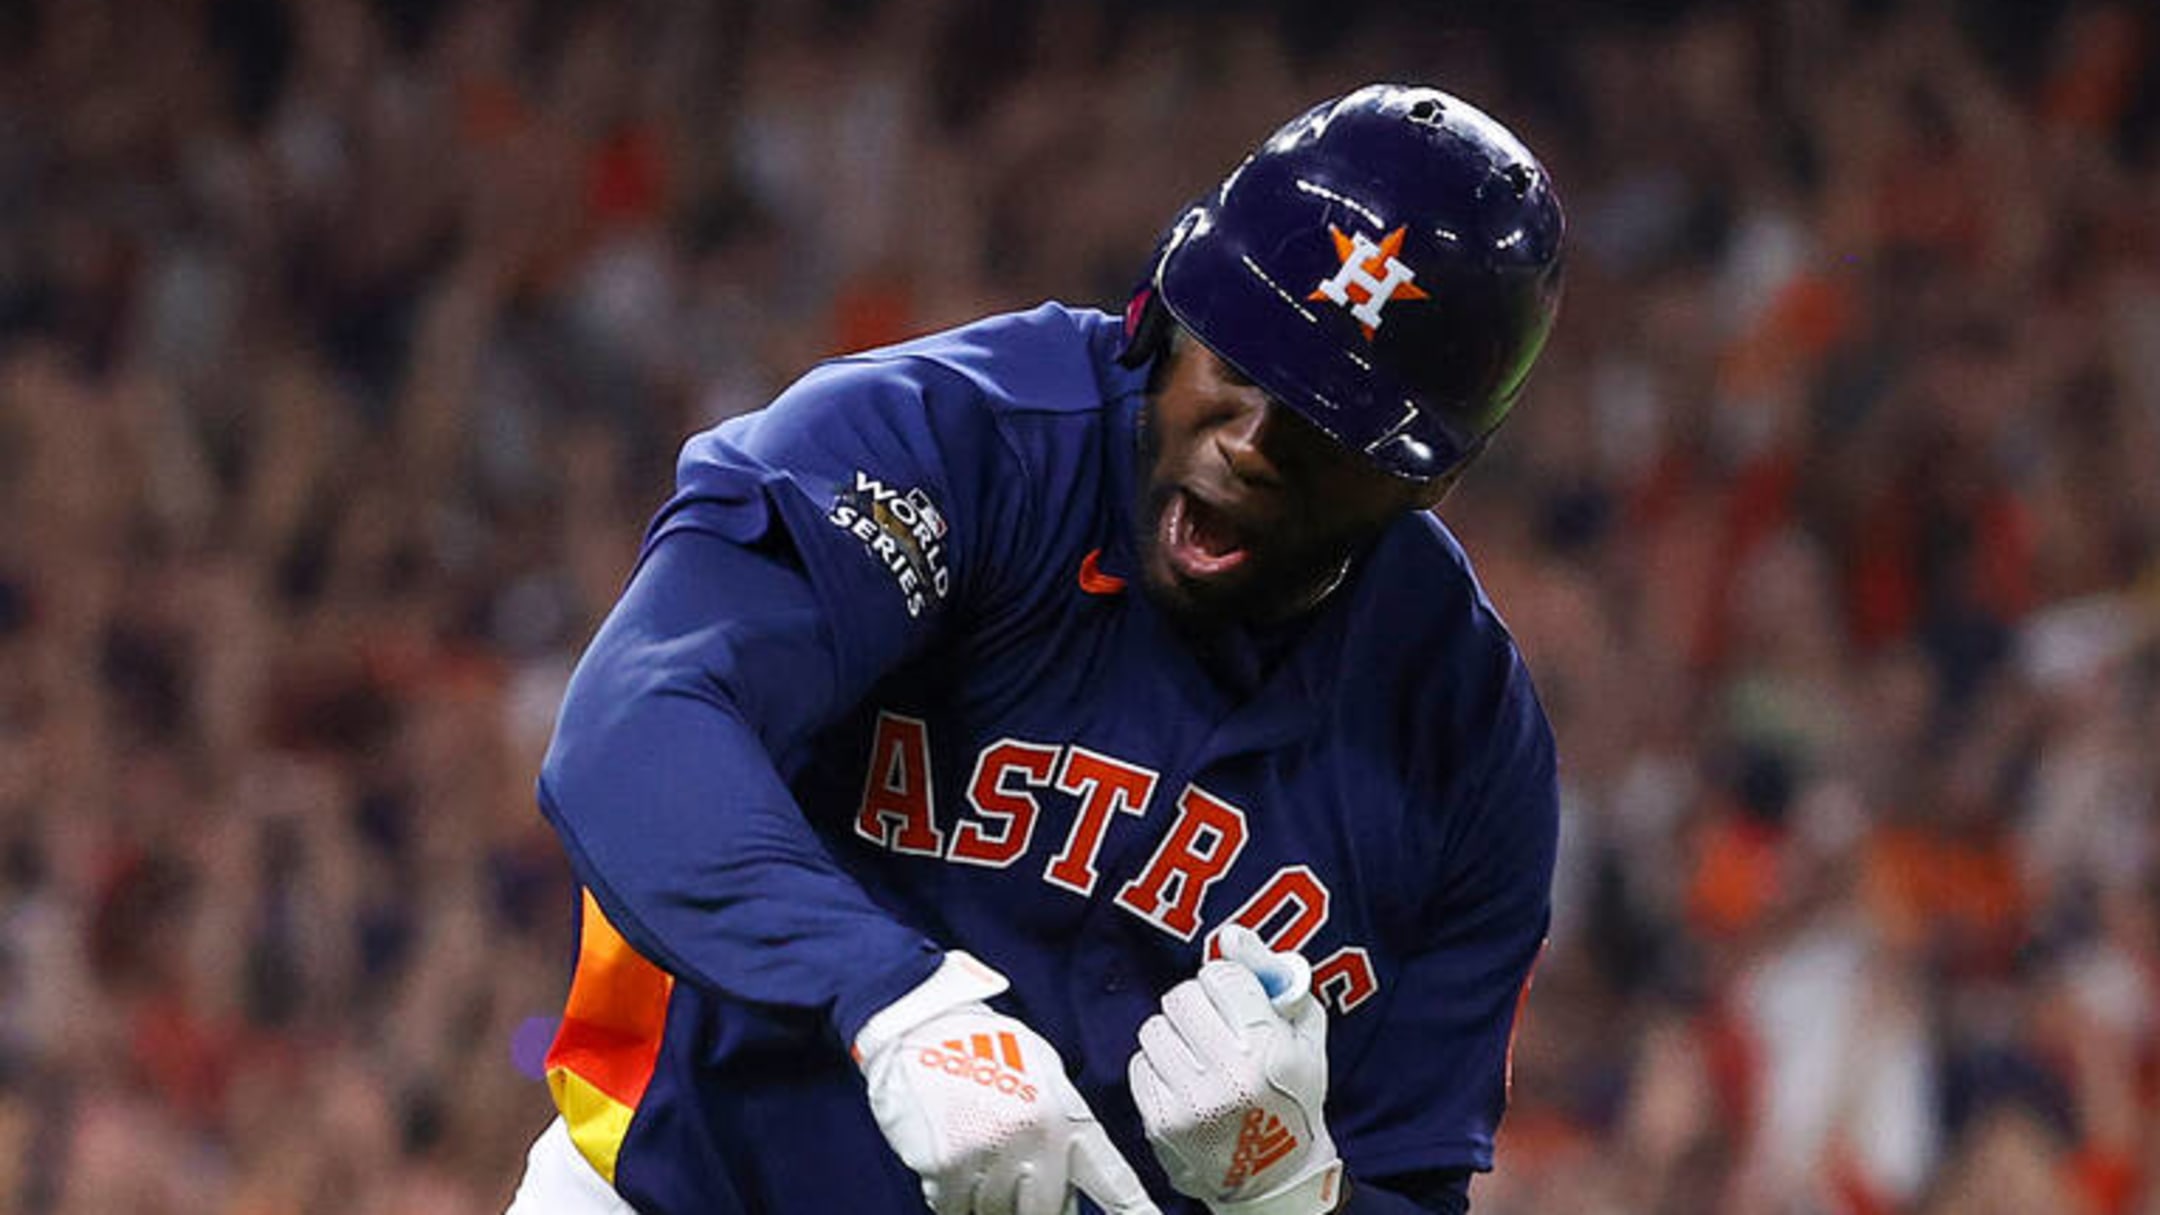 Astros clip Twins 6-4 behind 2 HRs from Yordan Alvarez, Other